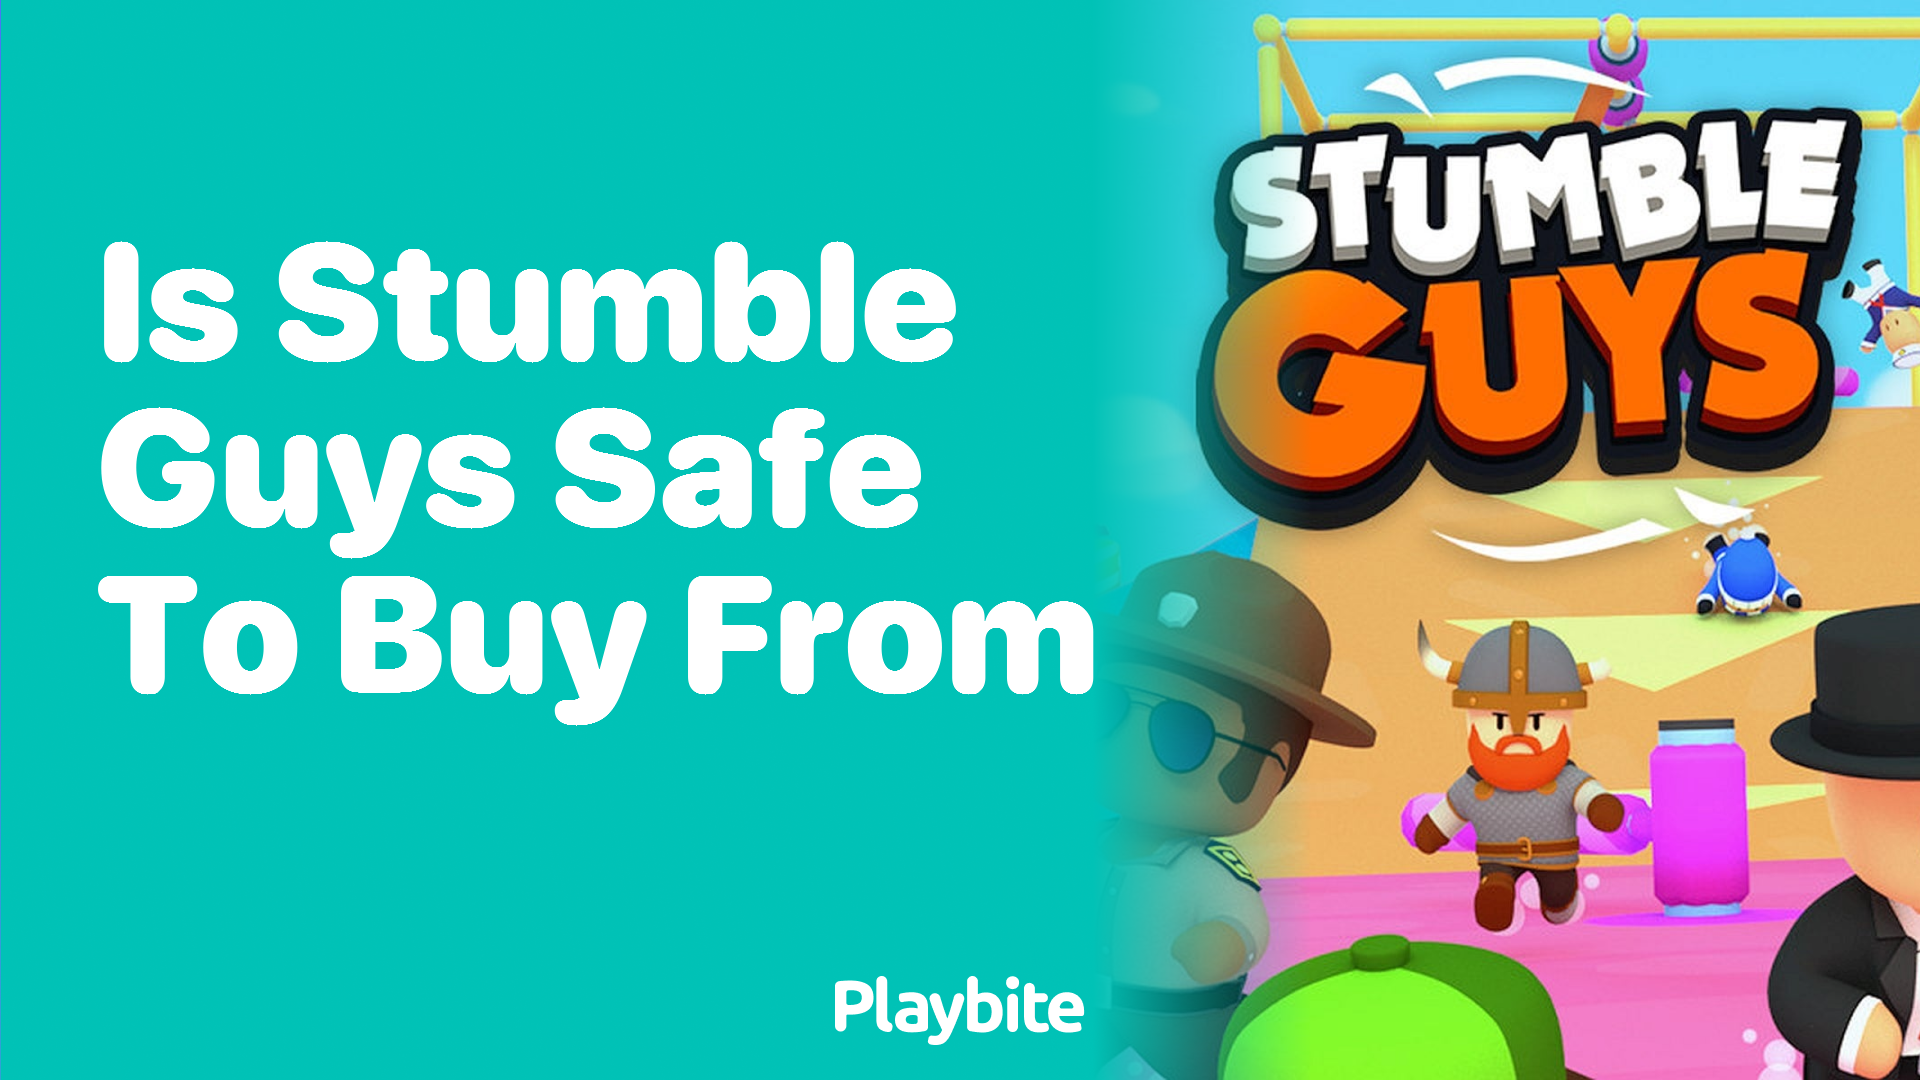 Is Stumble Guys Safe to Buy From? Unwrapping the Safety of Your Purchases